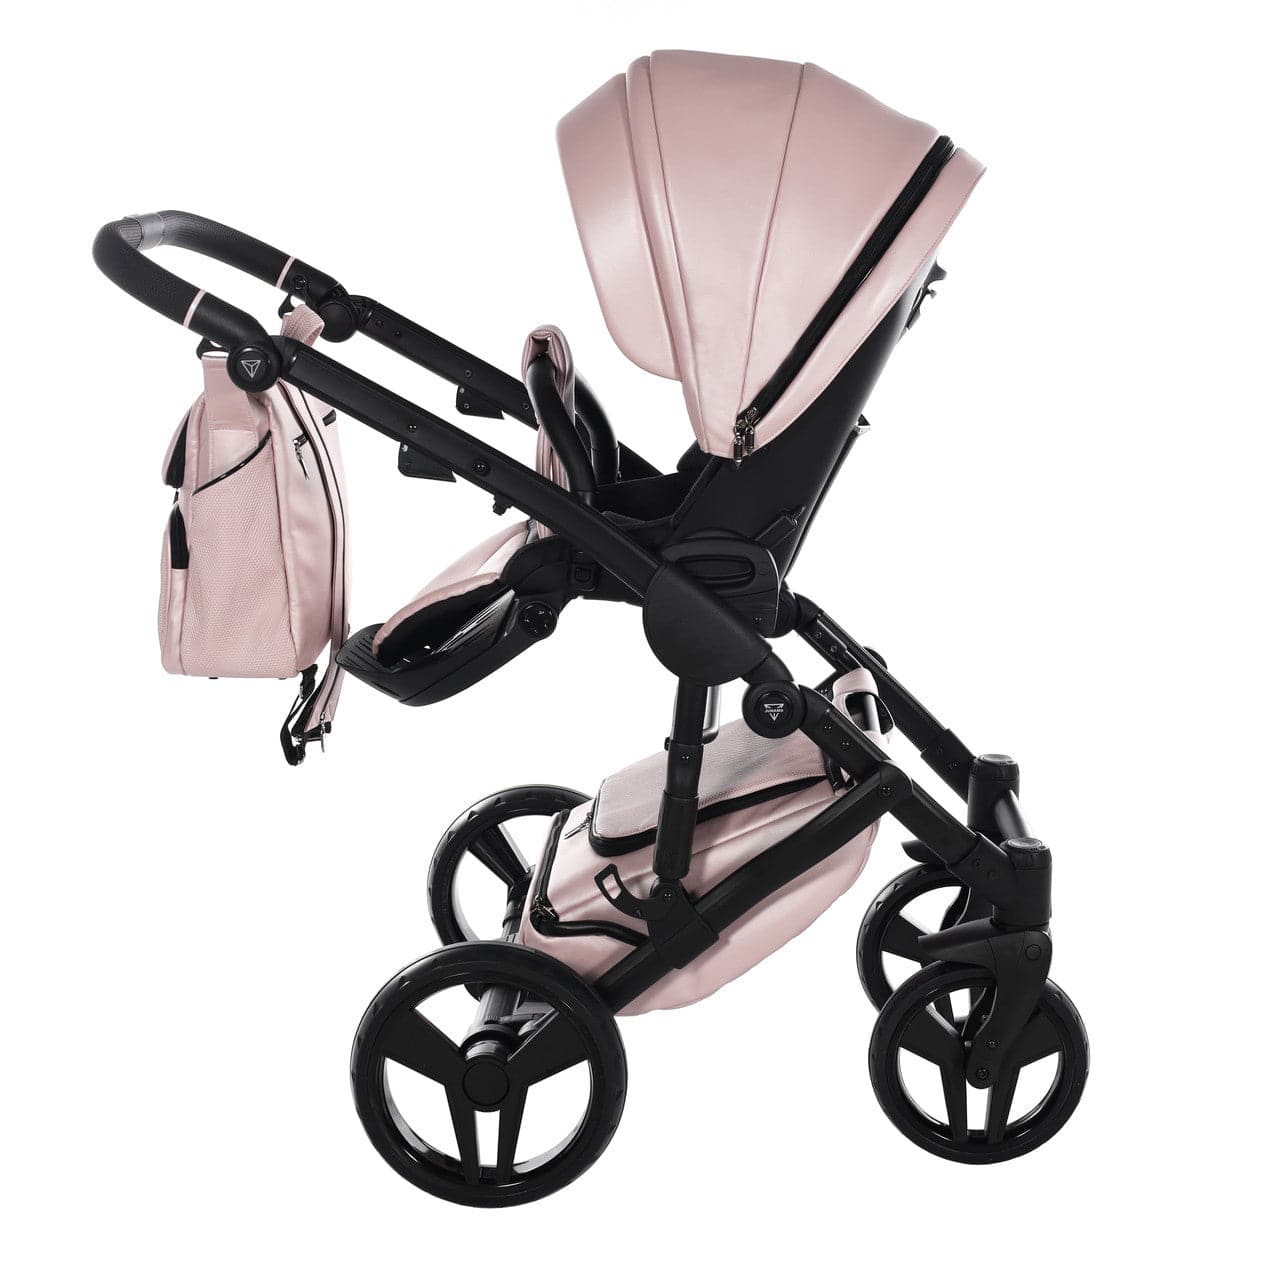 Junama S-Class 3 In 1 Travel System - Pink - For Your Little One